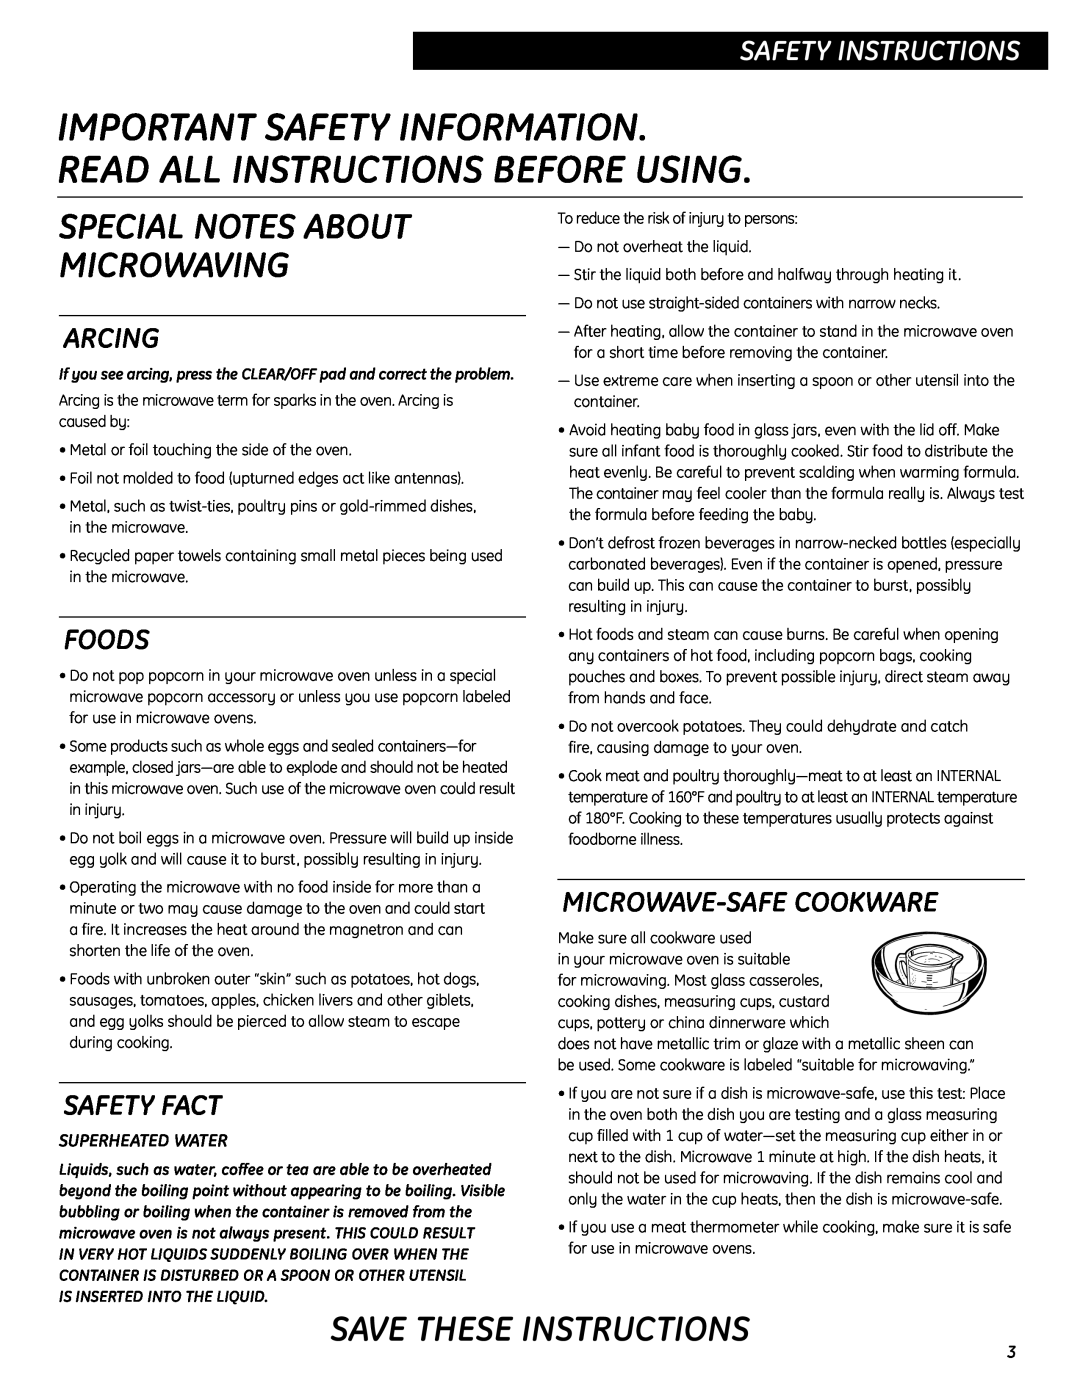 GE SESO732 quick start Important Safety Information Read All Instructions Before Using, Safety Instructions, Arcing, Foods 